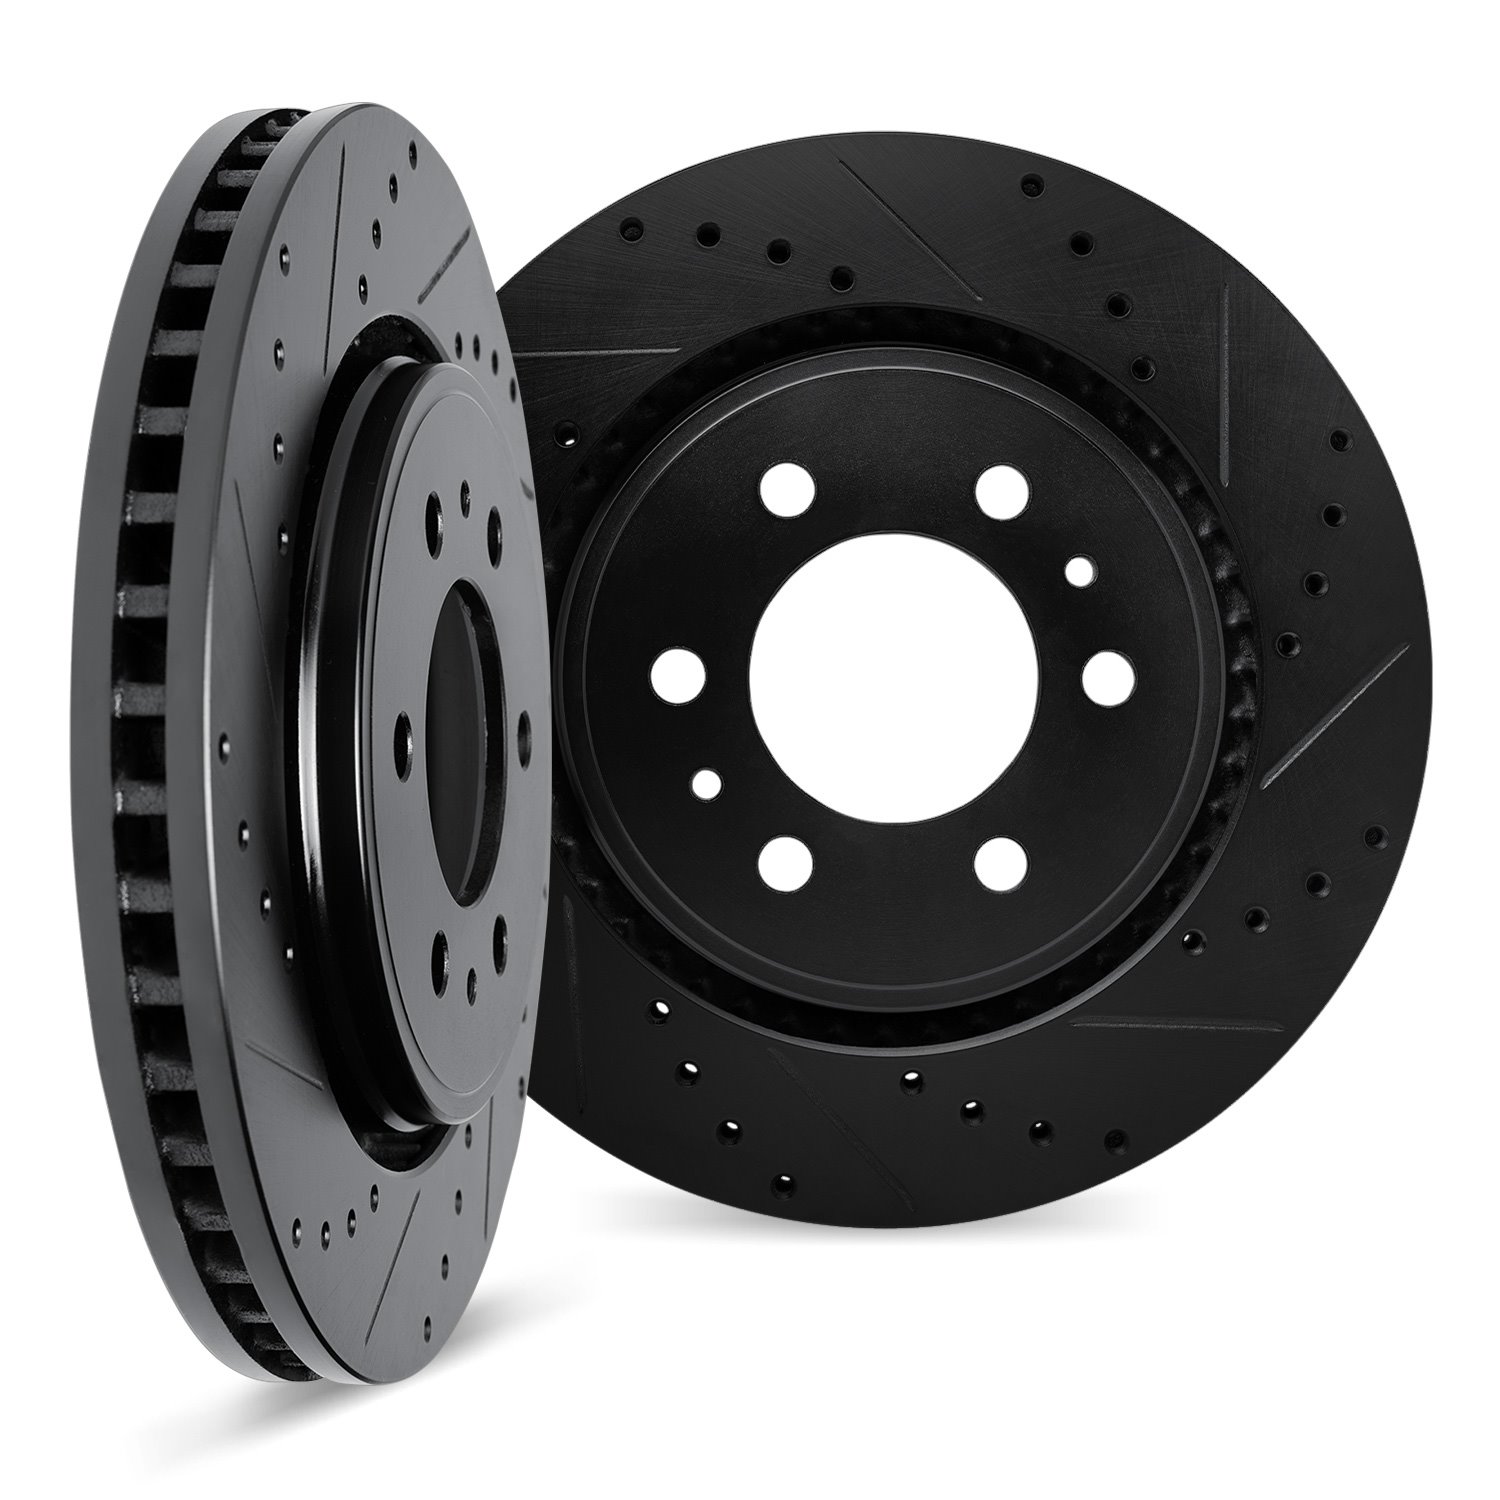 8002-54169 Drilled/Slotted Brake Rotors [Black], Fits Select Ford/Lincoln/Mercury/Mazda, Position: Front